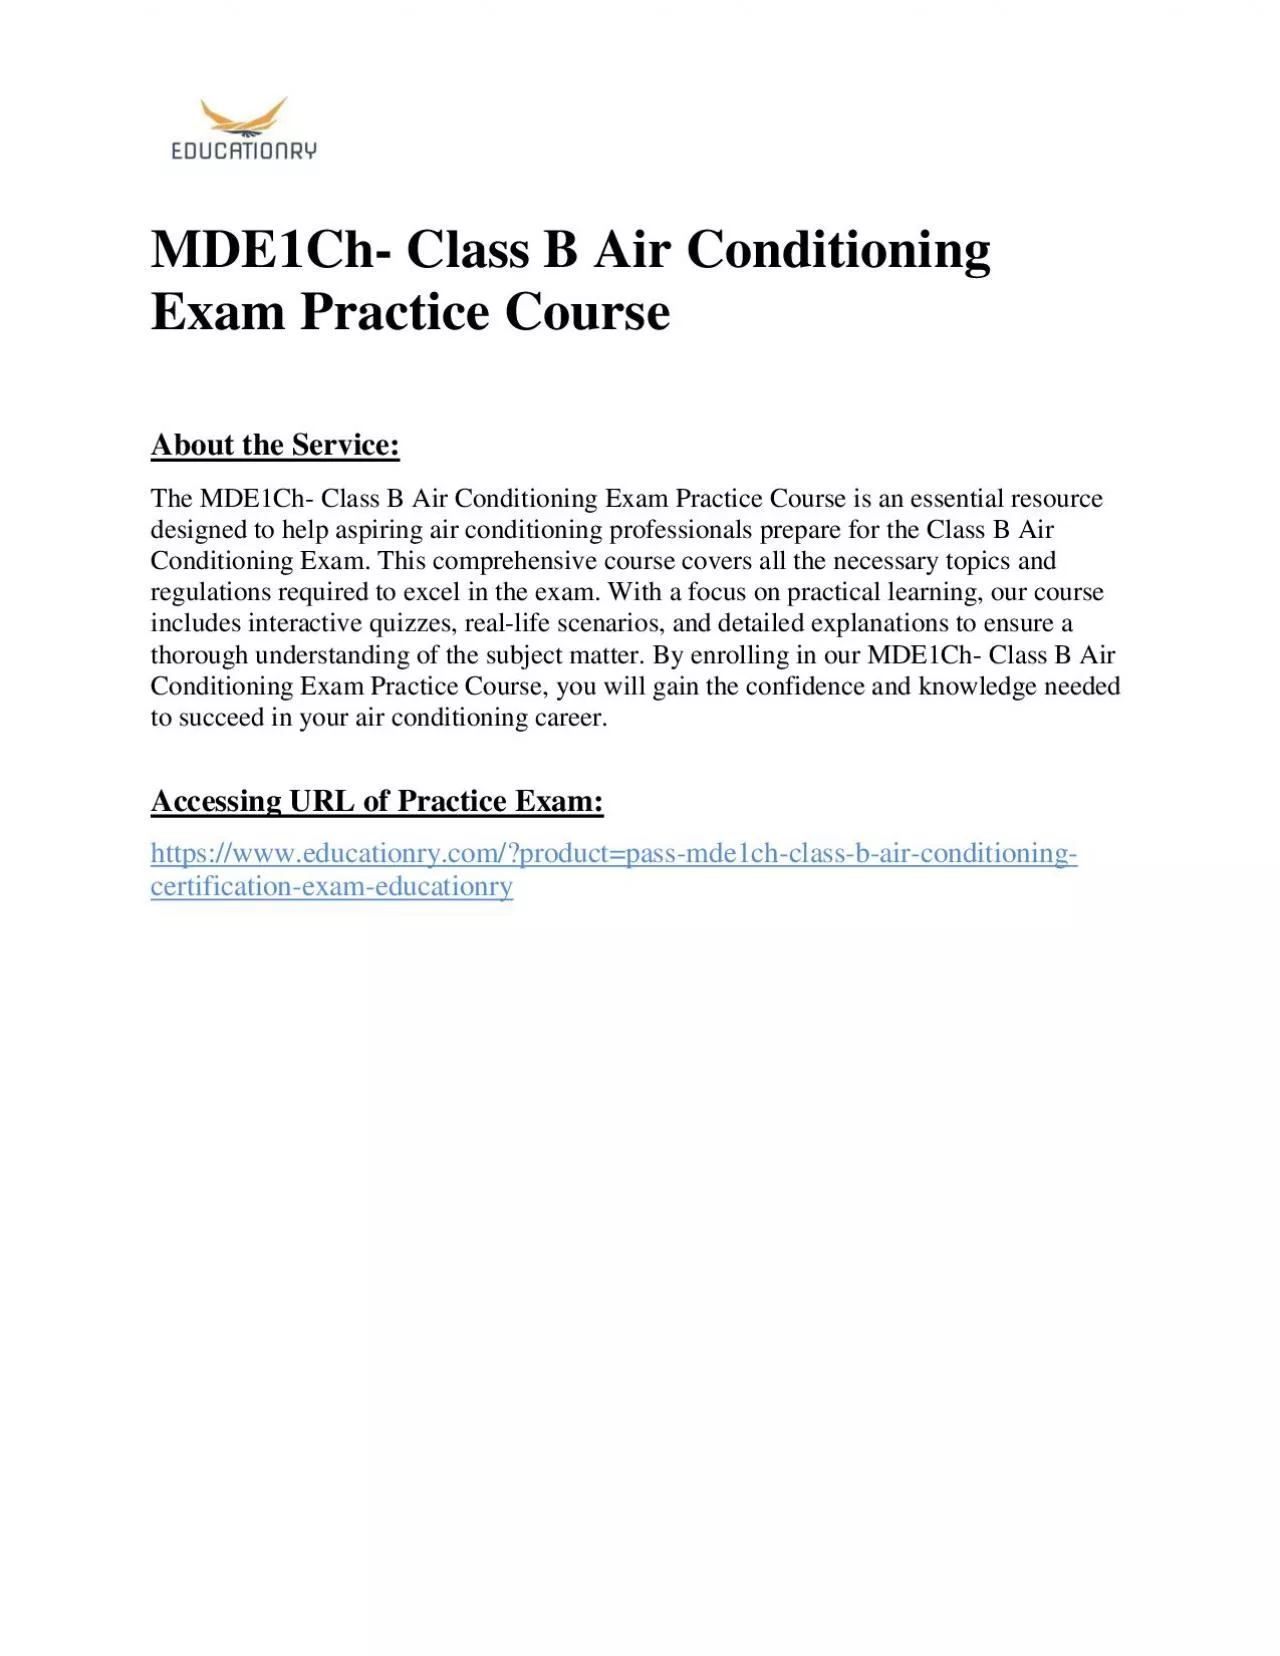 MDE1Ch- Class B Air Conditioning Exam Practice Course